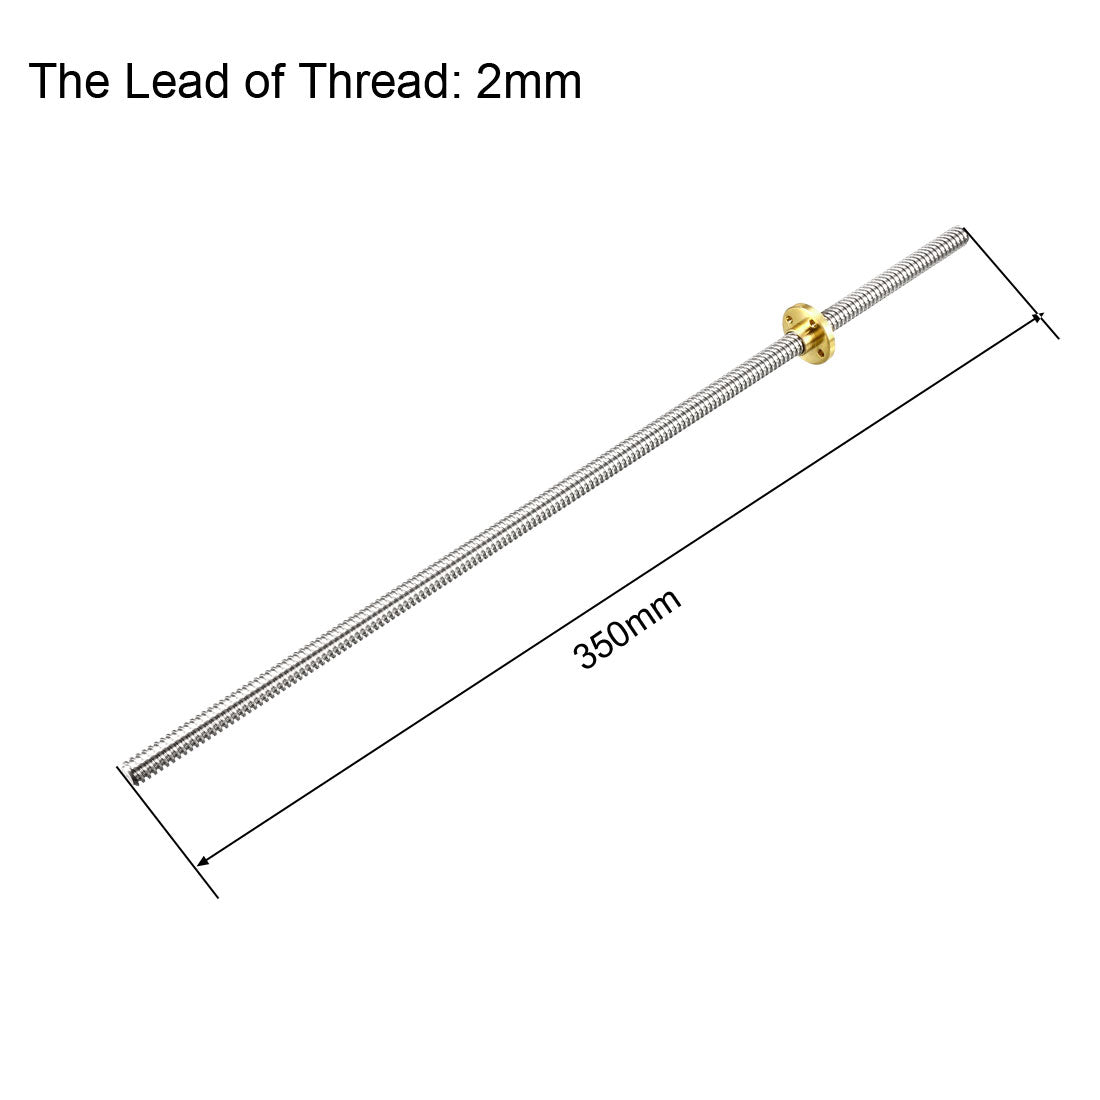 uxcell Uxcell 350mm T8 Pitch 2mm Lead 2mm Lead Screw Rod with Copper Nut for 3D Printer